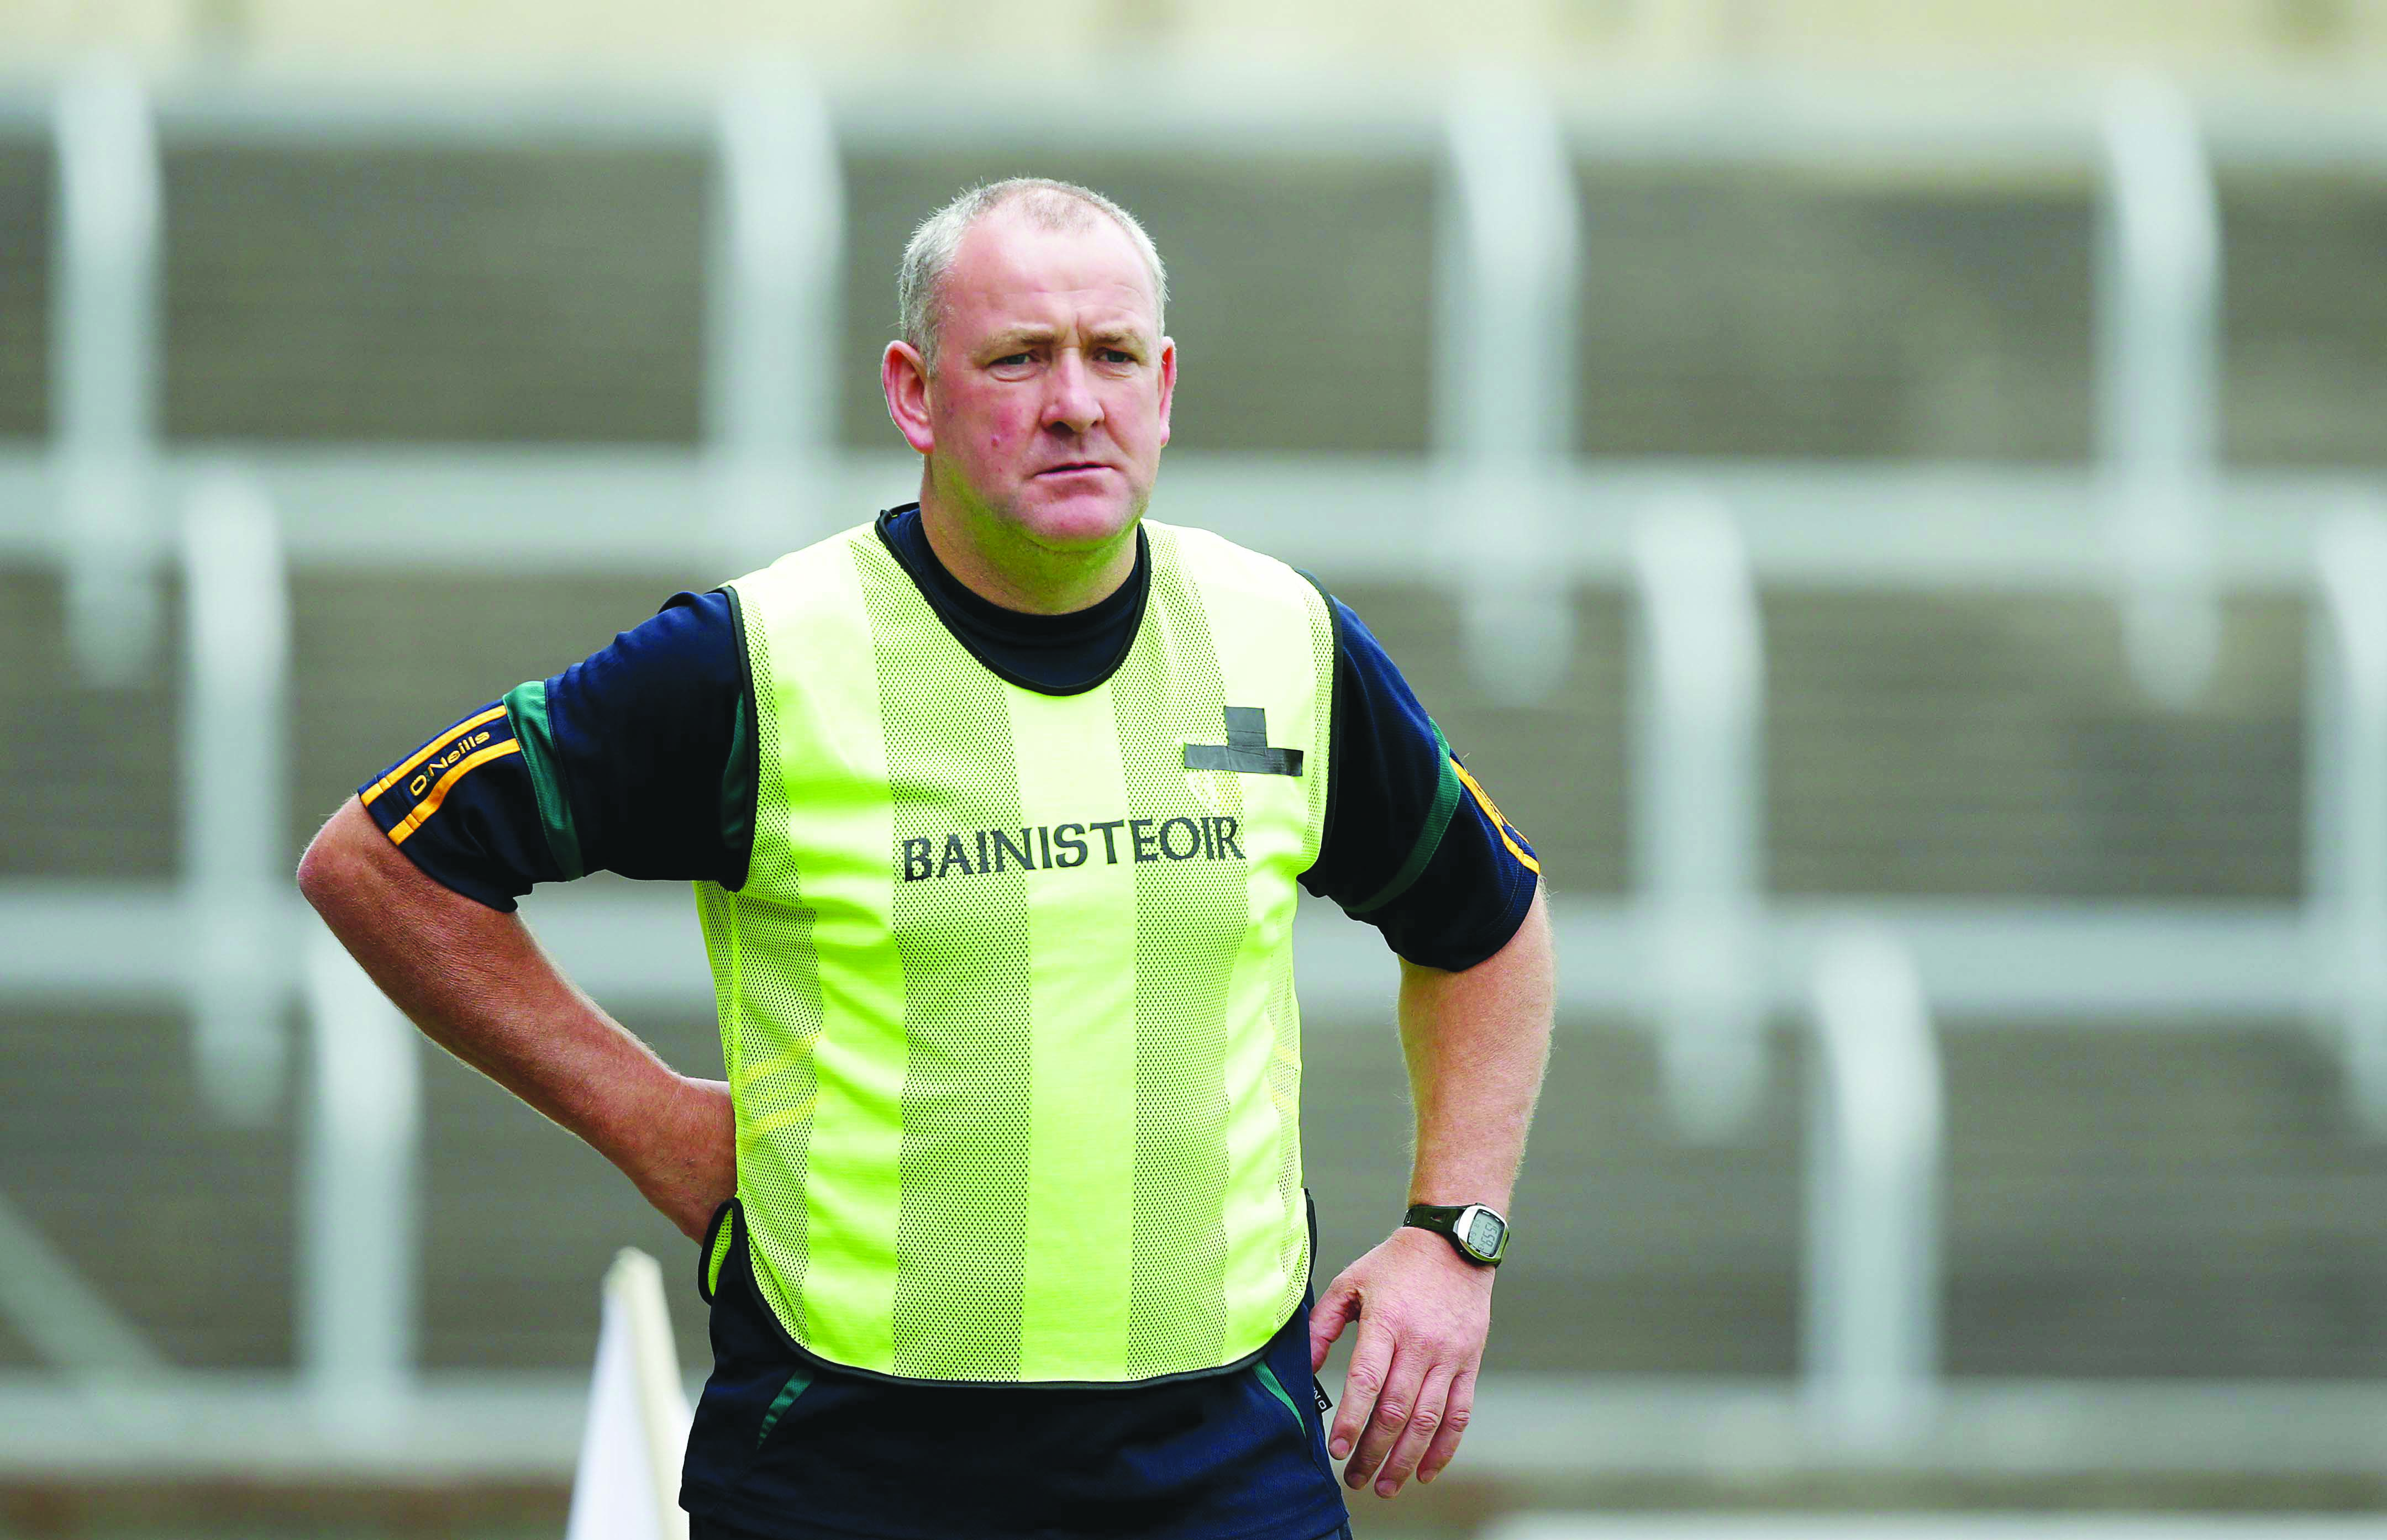 Antrim joint-manager Frank Fitzsimons has blasted the latest Championship proposals